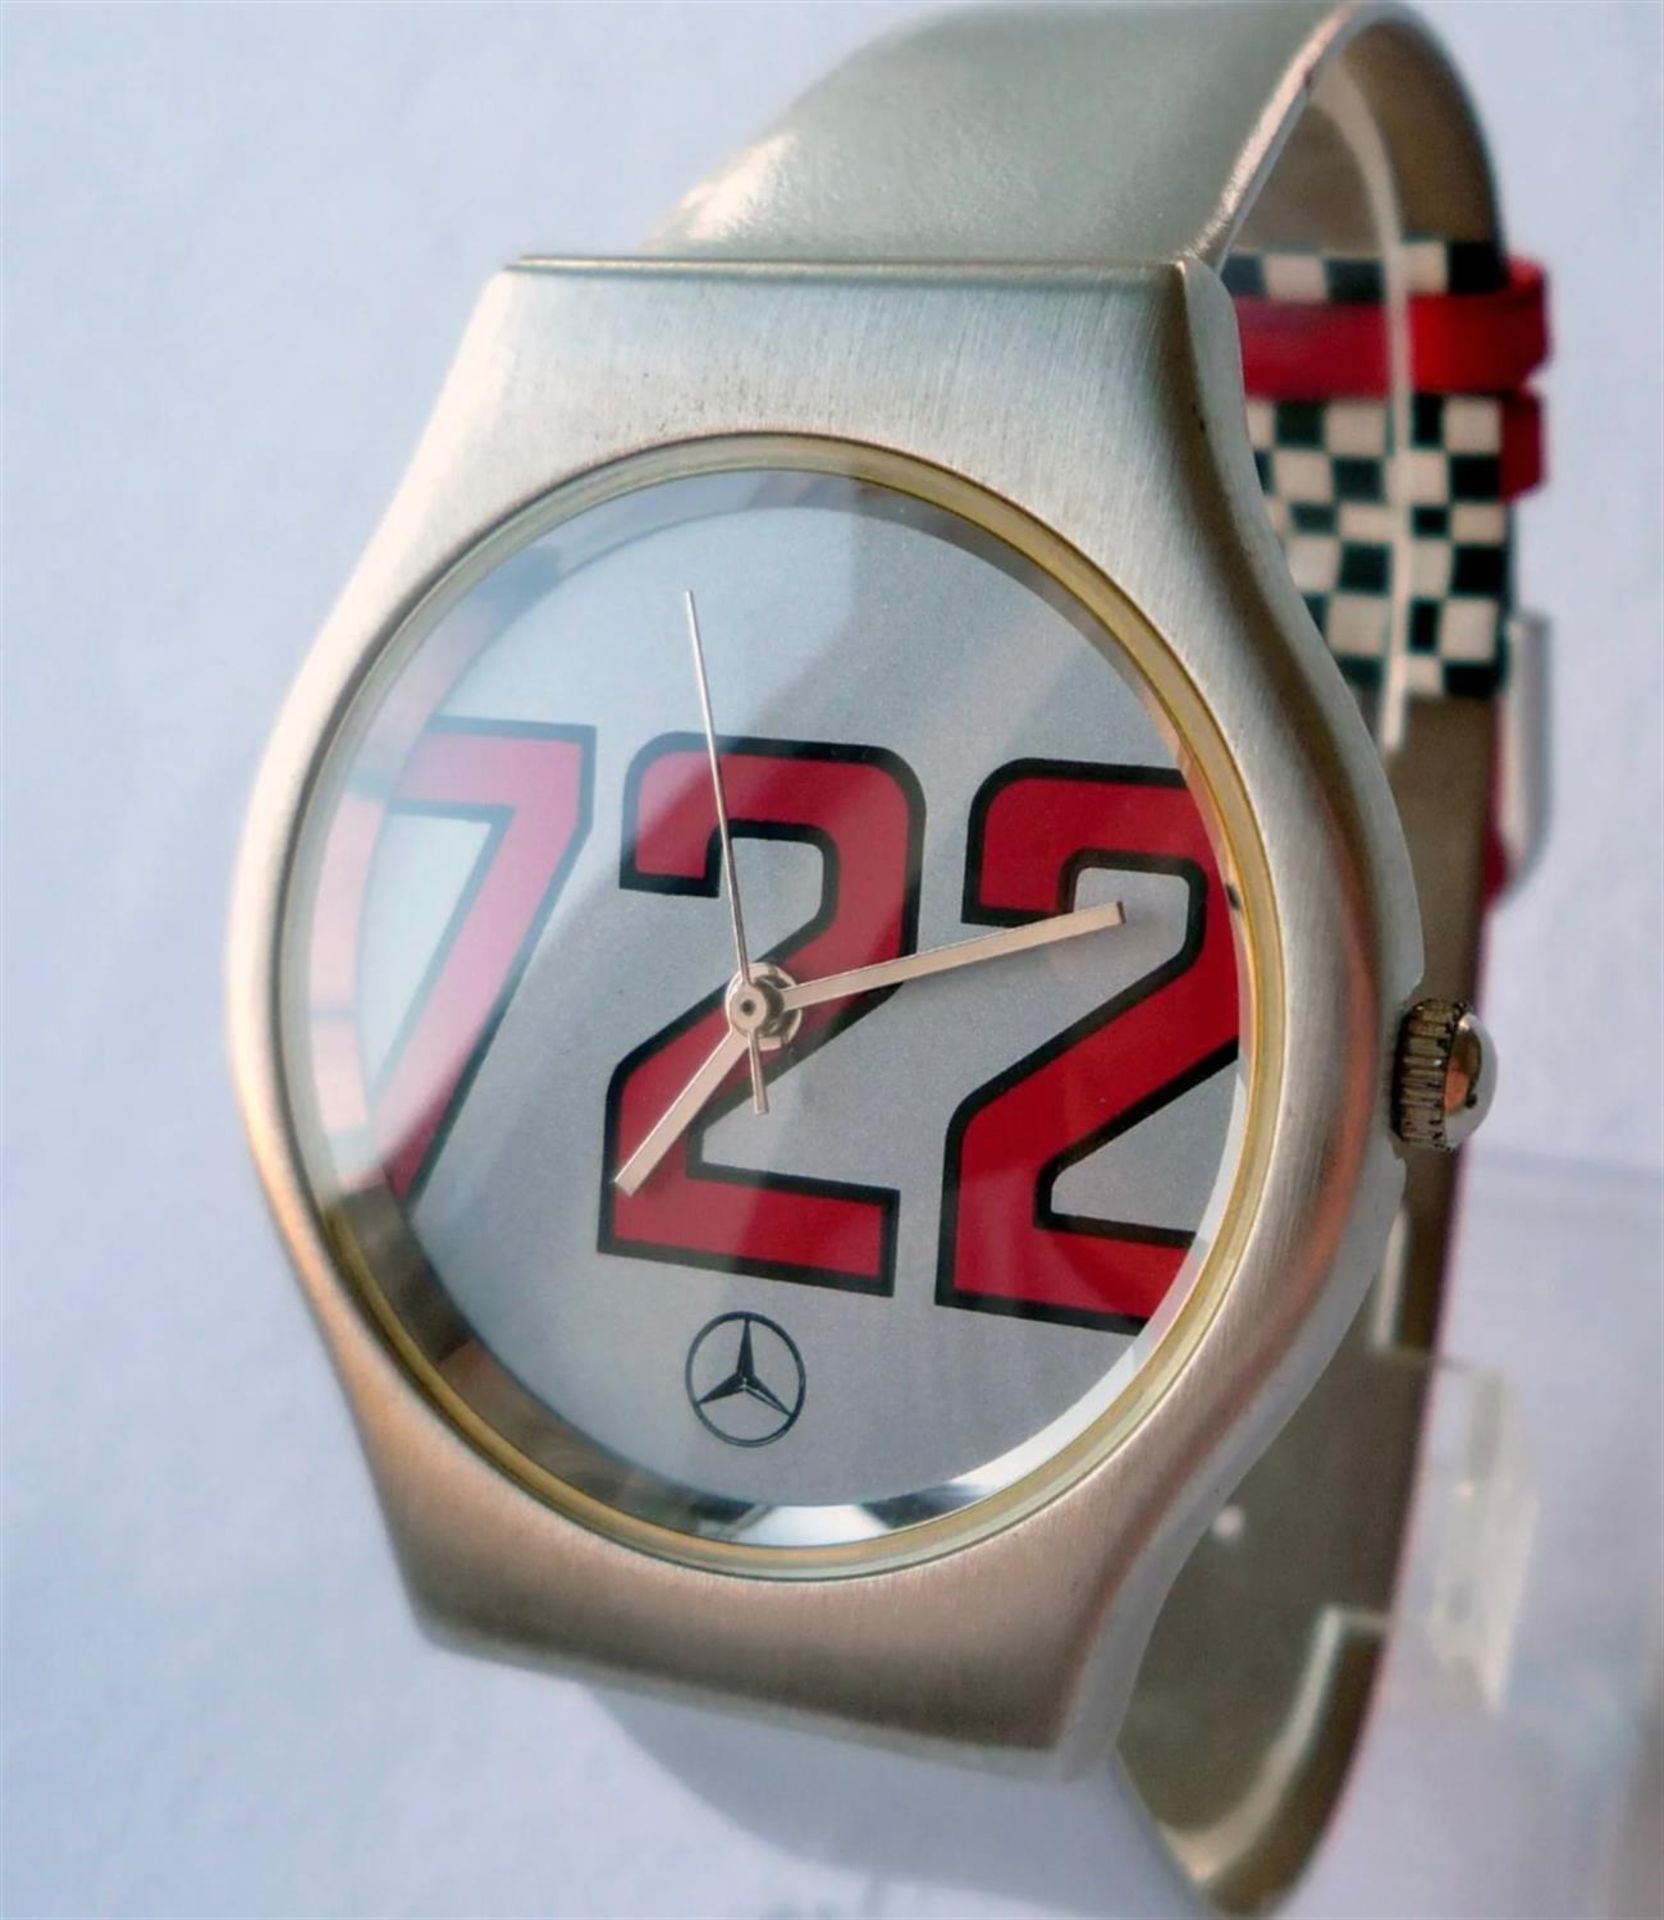 A Rare and Genuine Mercedes-Benz 722 Mille Miglia Classic Racing Watch - Image 8 of 10